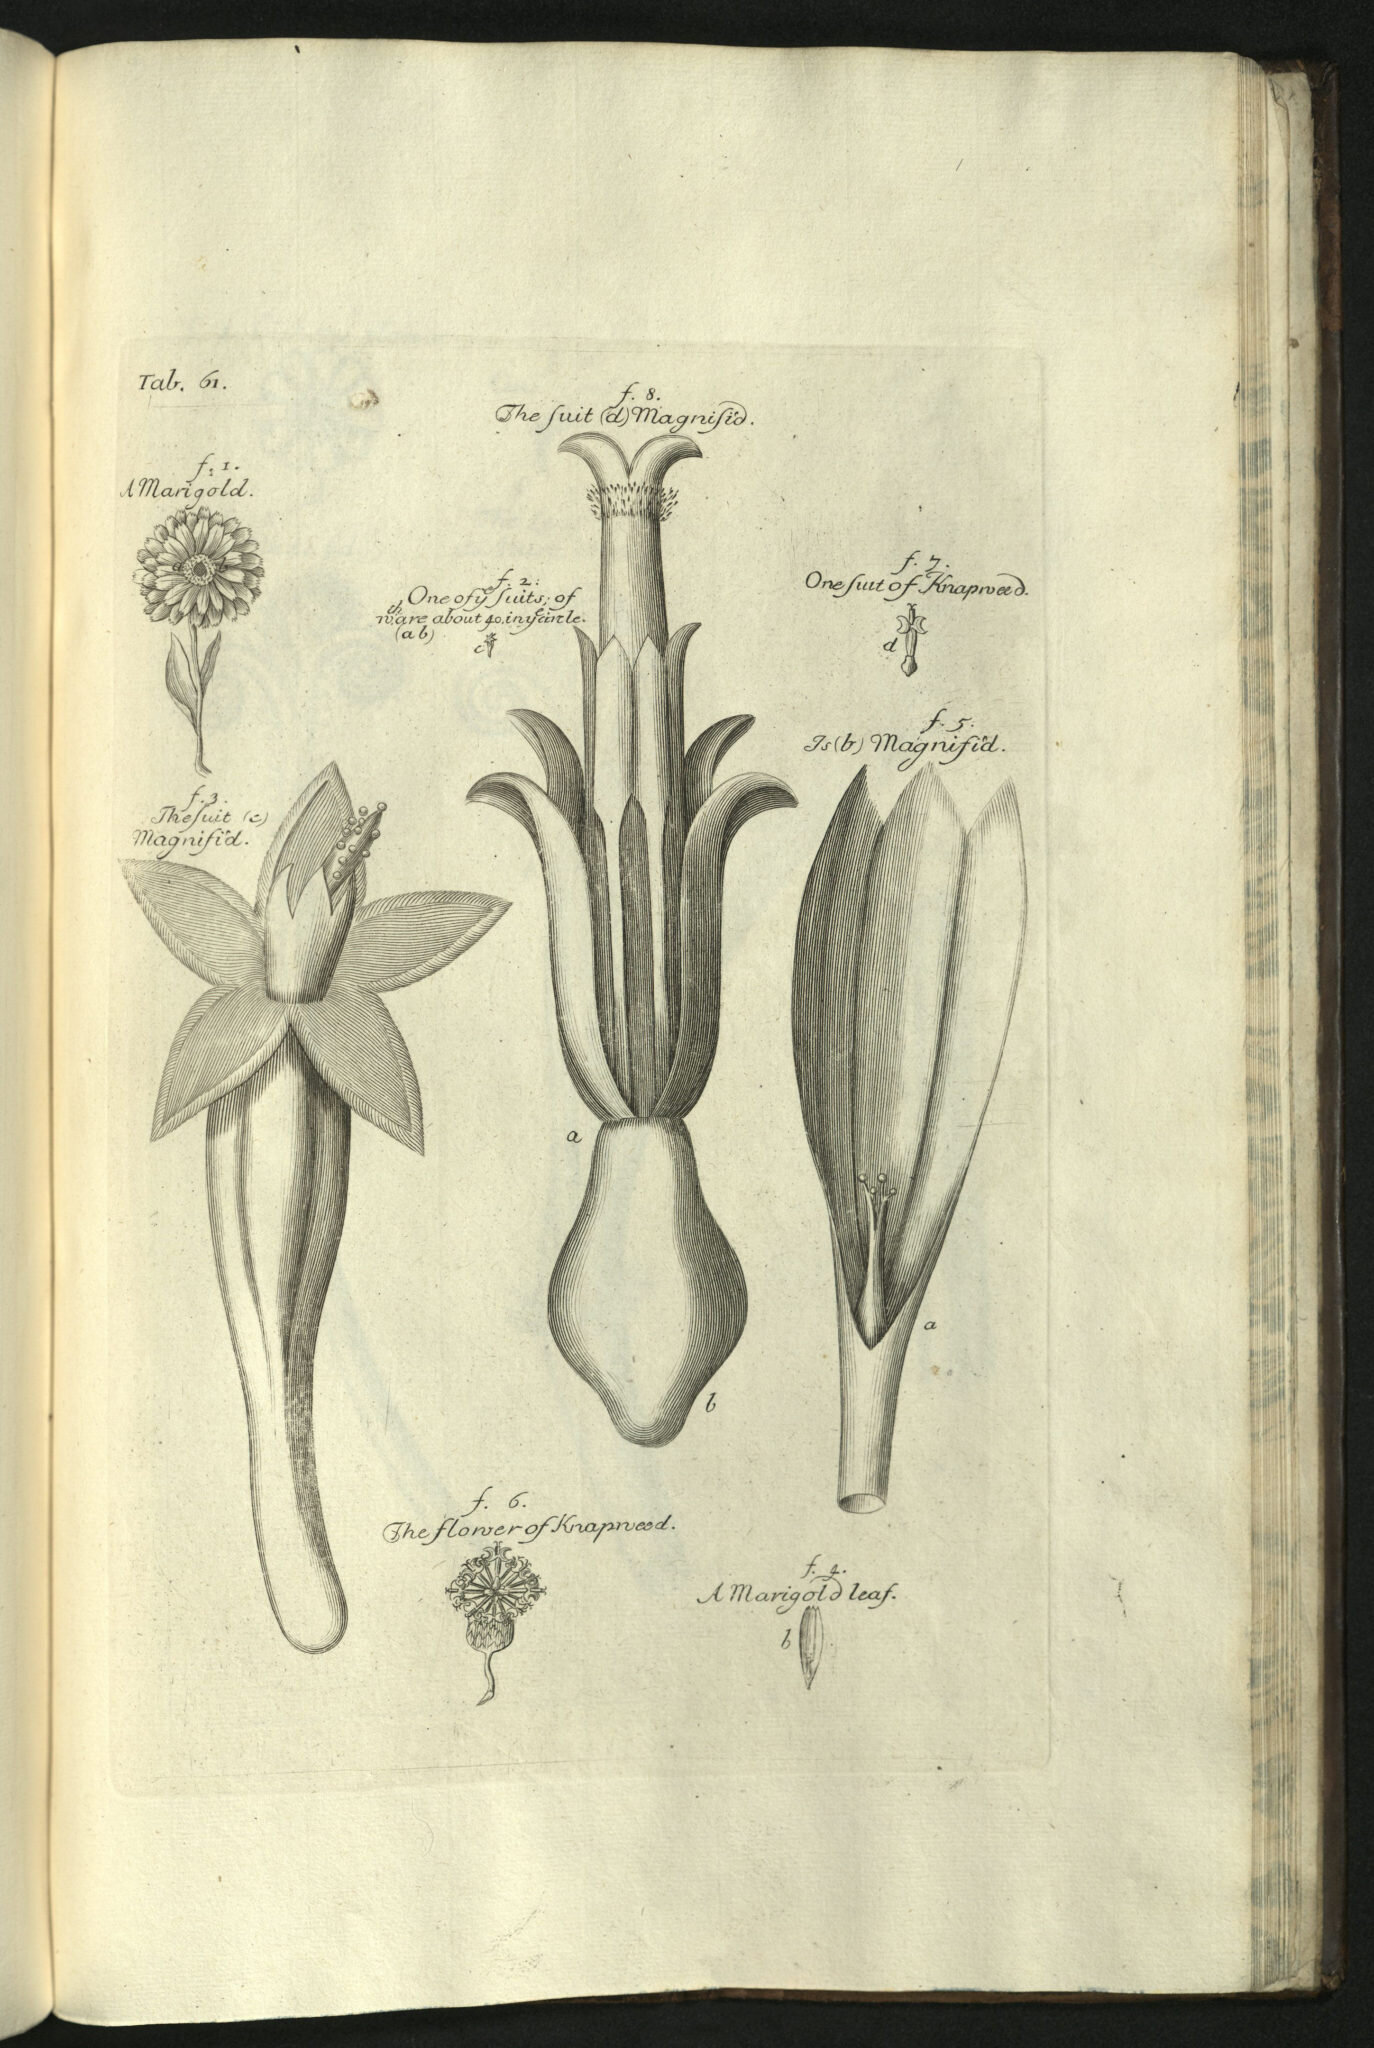 Illustrative plate from Nehemiah Grew's The Anatomy of Plants